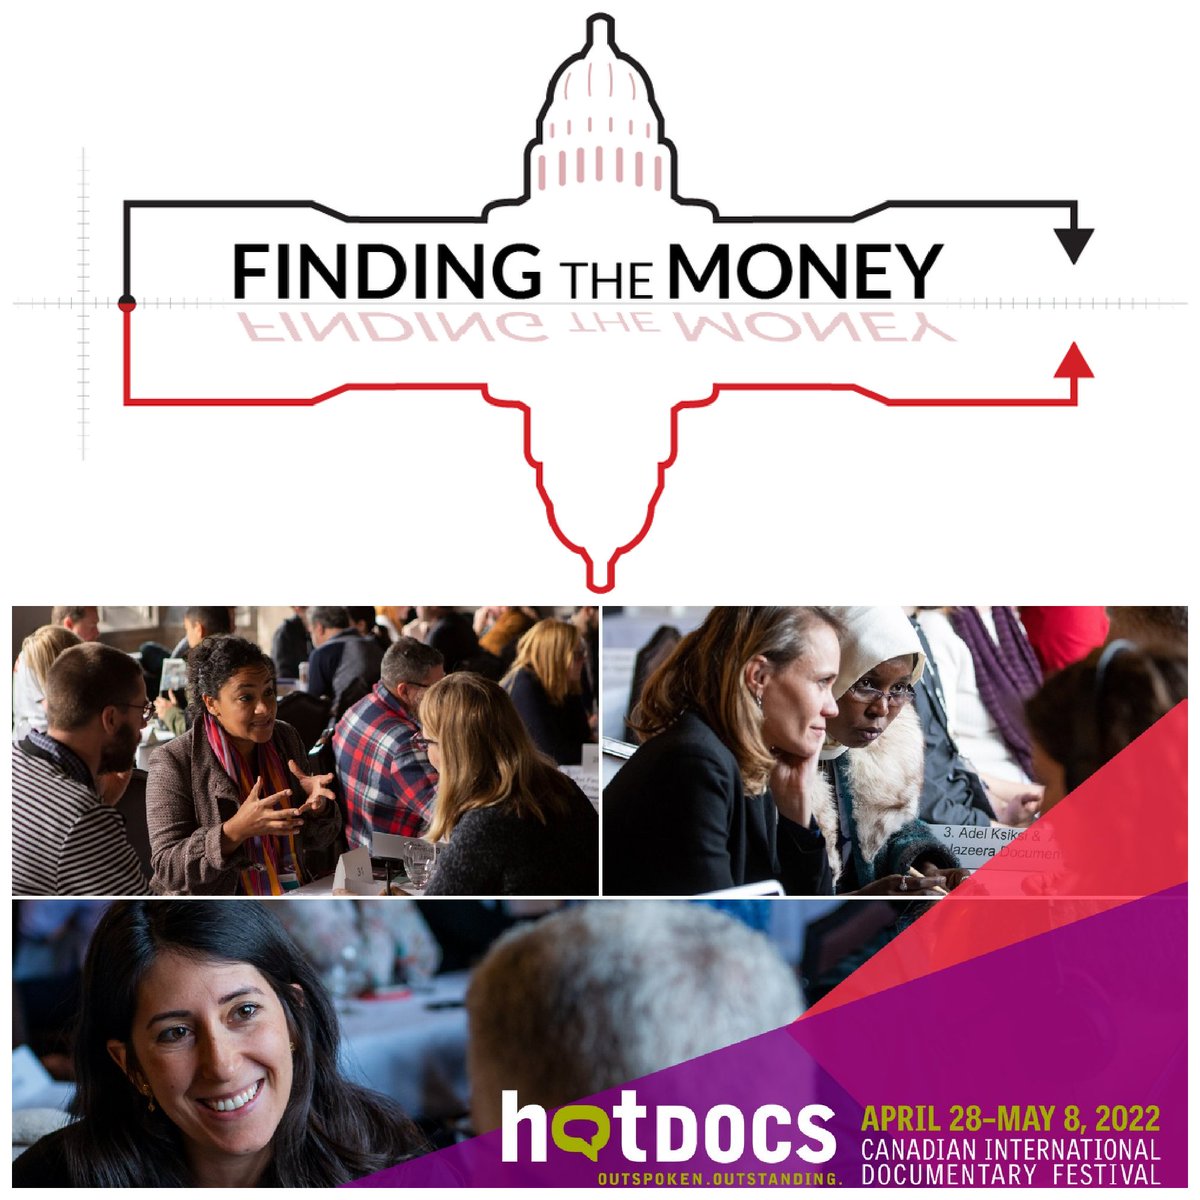 ICYMI ... @FindingMoneyDoc, now in post-production, has been selected to participate in this year's @hotdocs Deal Maker! AND our very own @MarcSmolowitz has joined the team as Executive Producer! #FindingTheMoney #FemaleFilmmakerFriday #MMT #HotDocs22